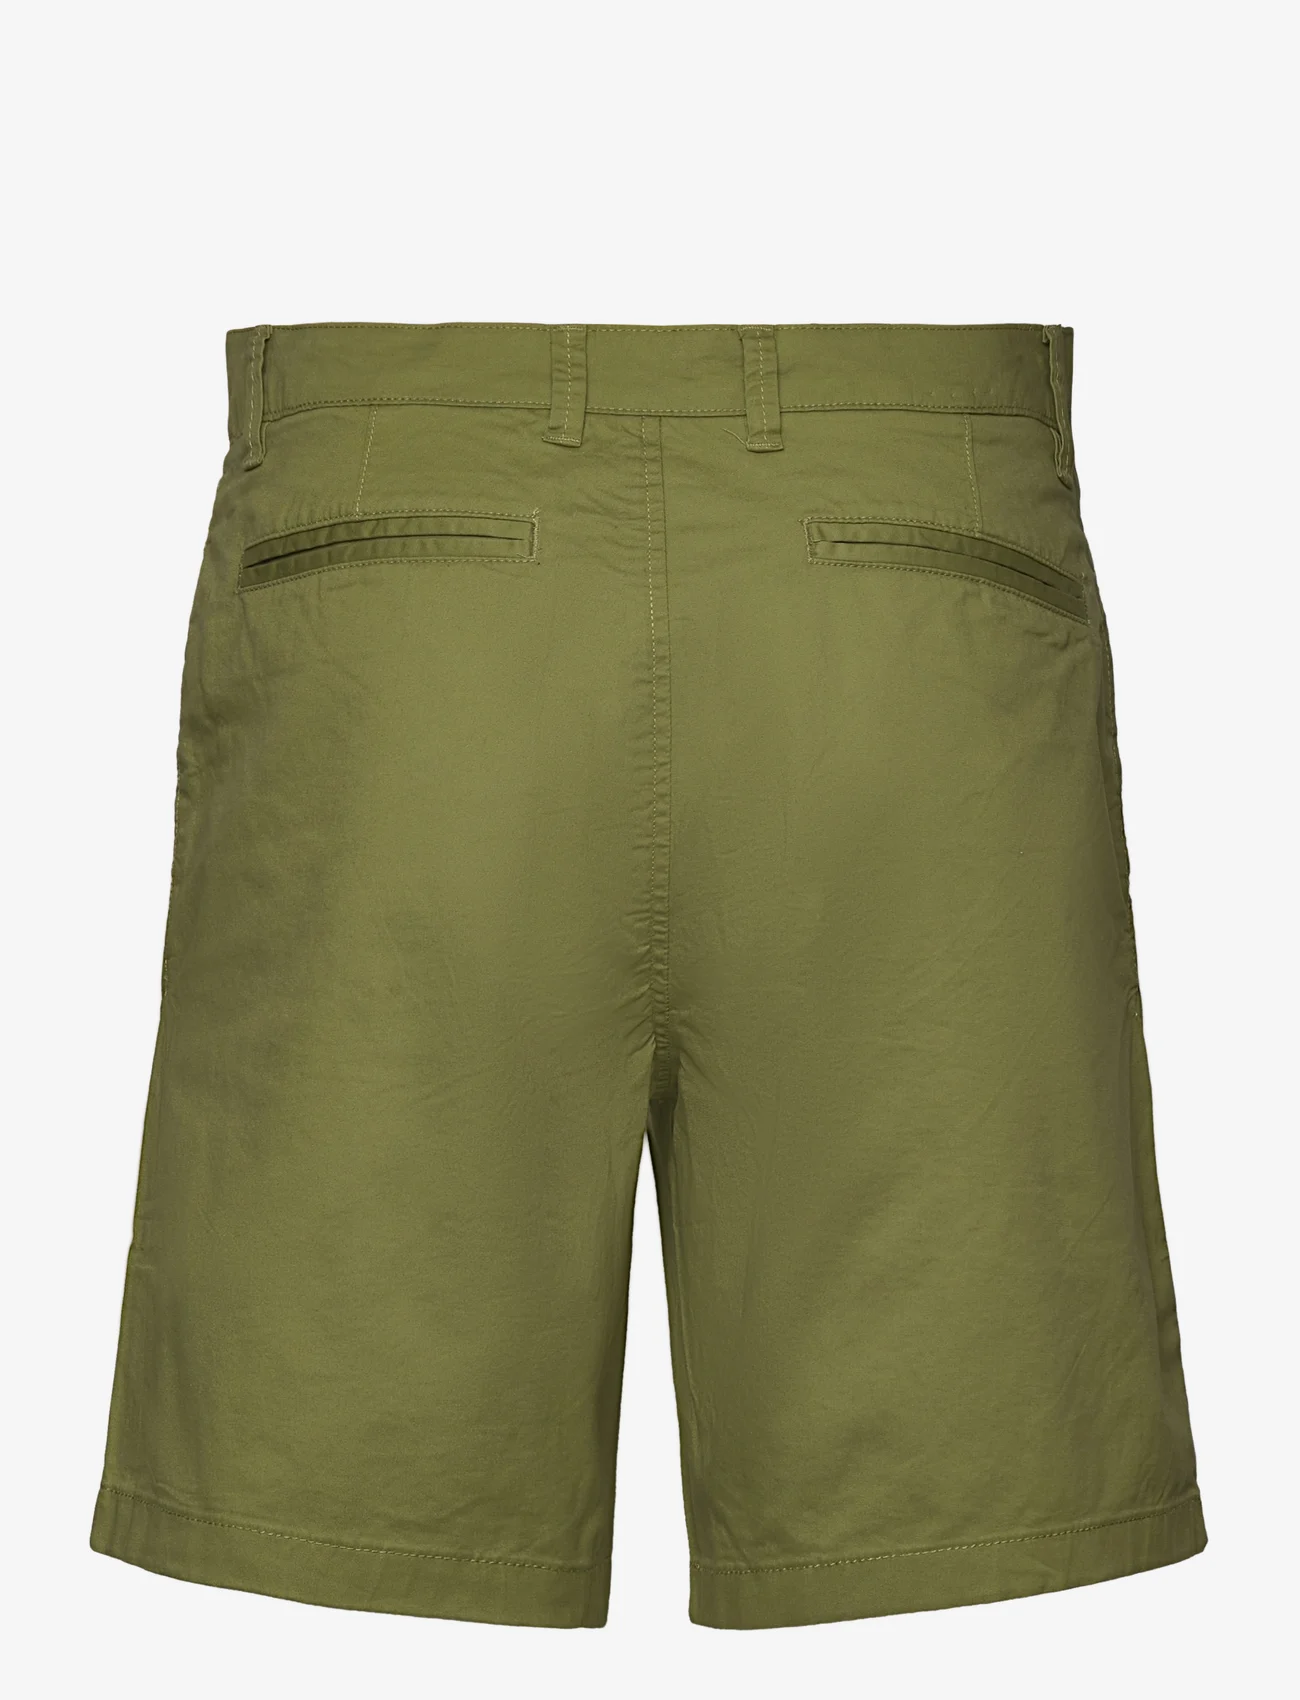 Selected Homme - SLHCOMFORT-HOMME FLEX SHORTS W NOOS - chinos shorts - olive branch - 1